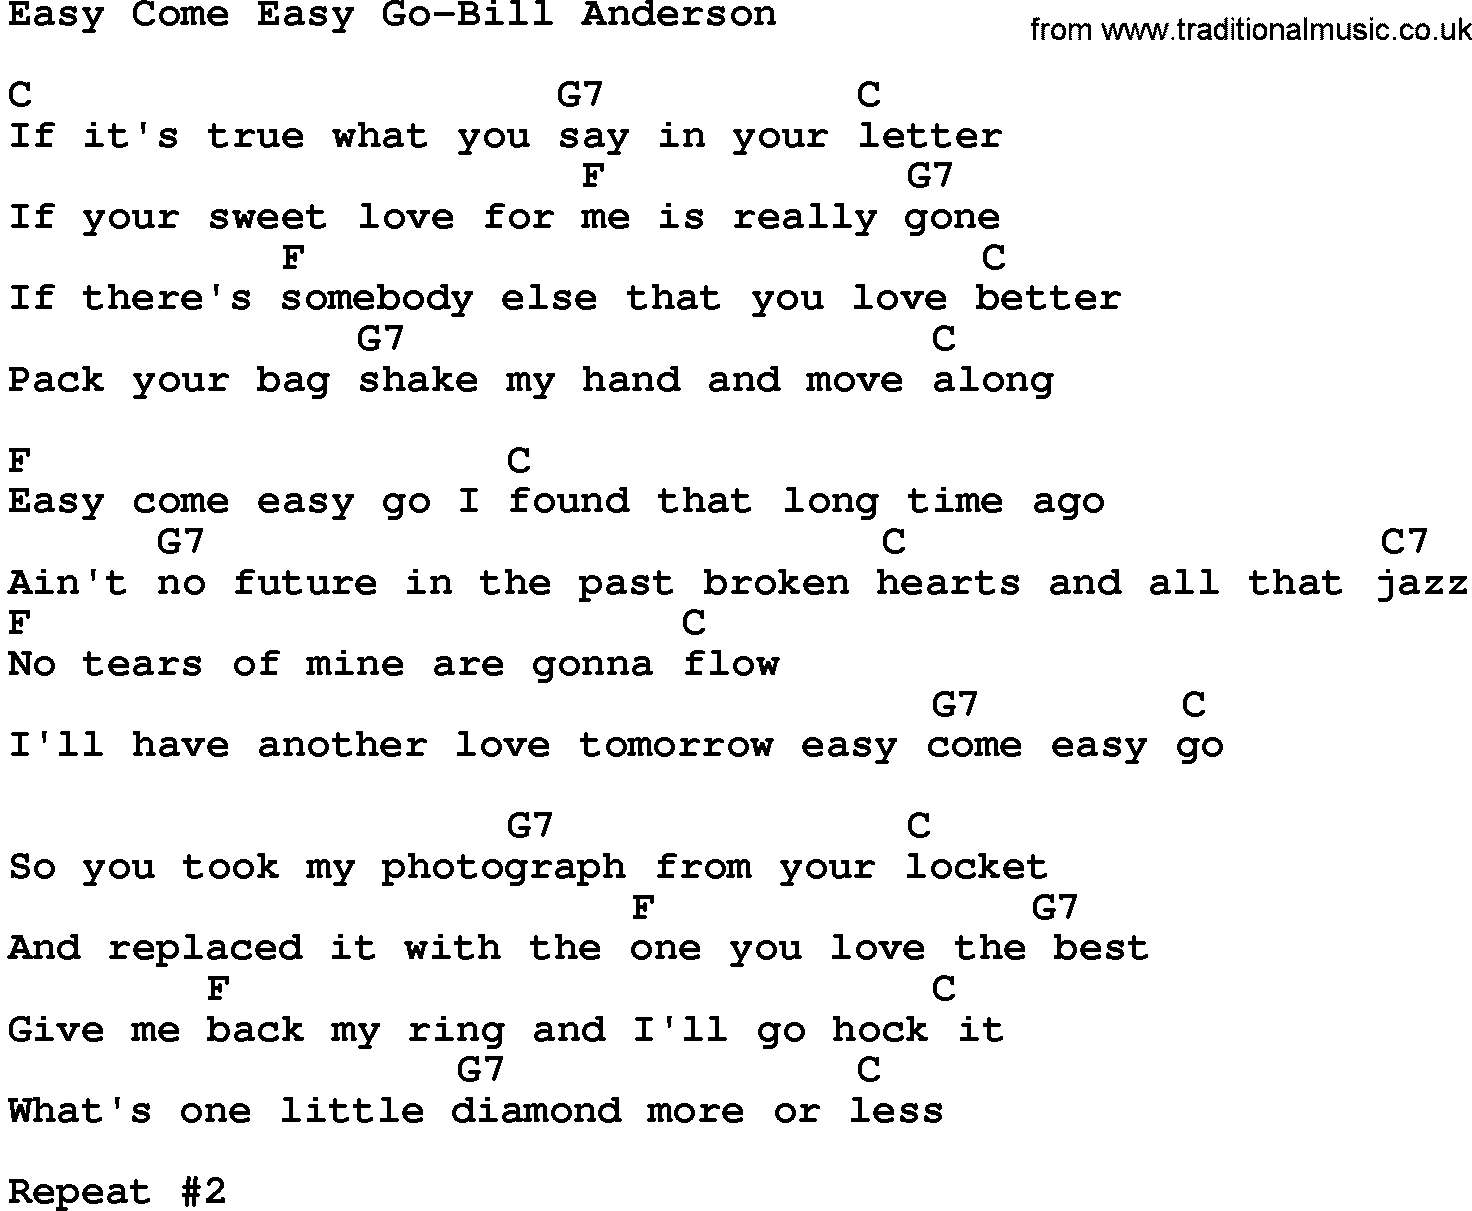 Country music song: Easy Come Easy Go-Bill Anderson lyrics and chords